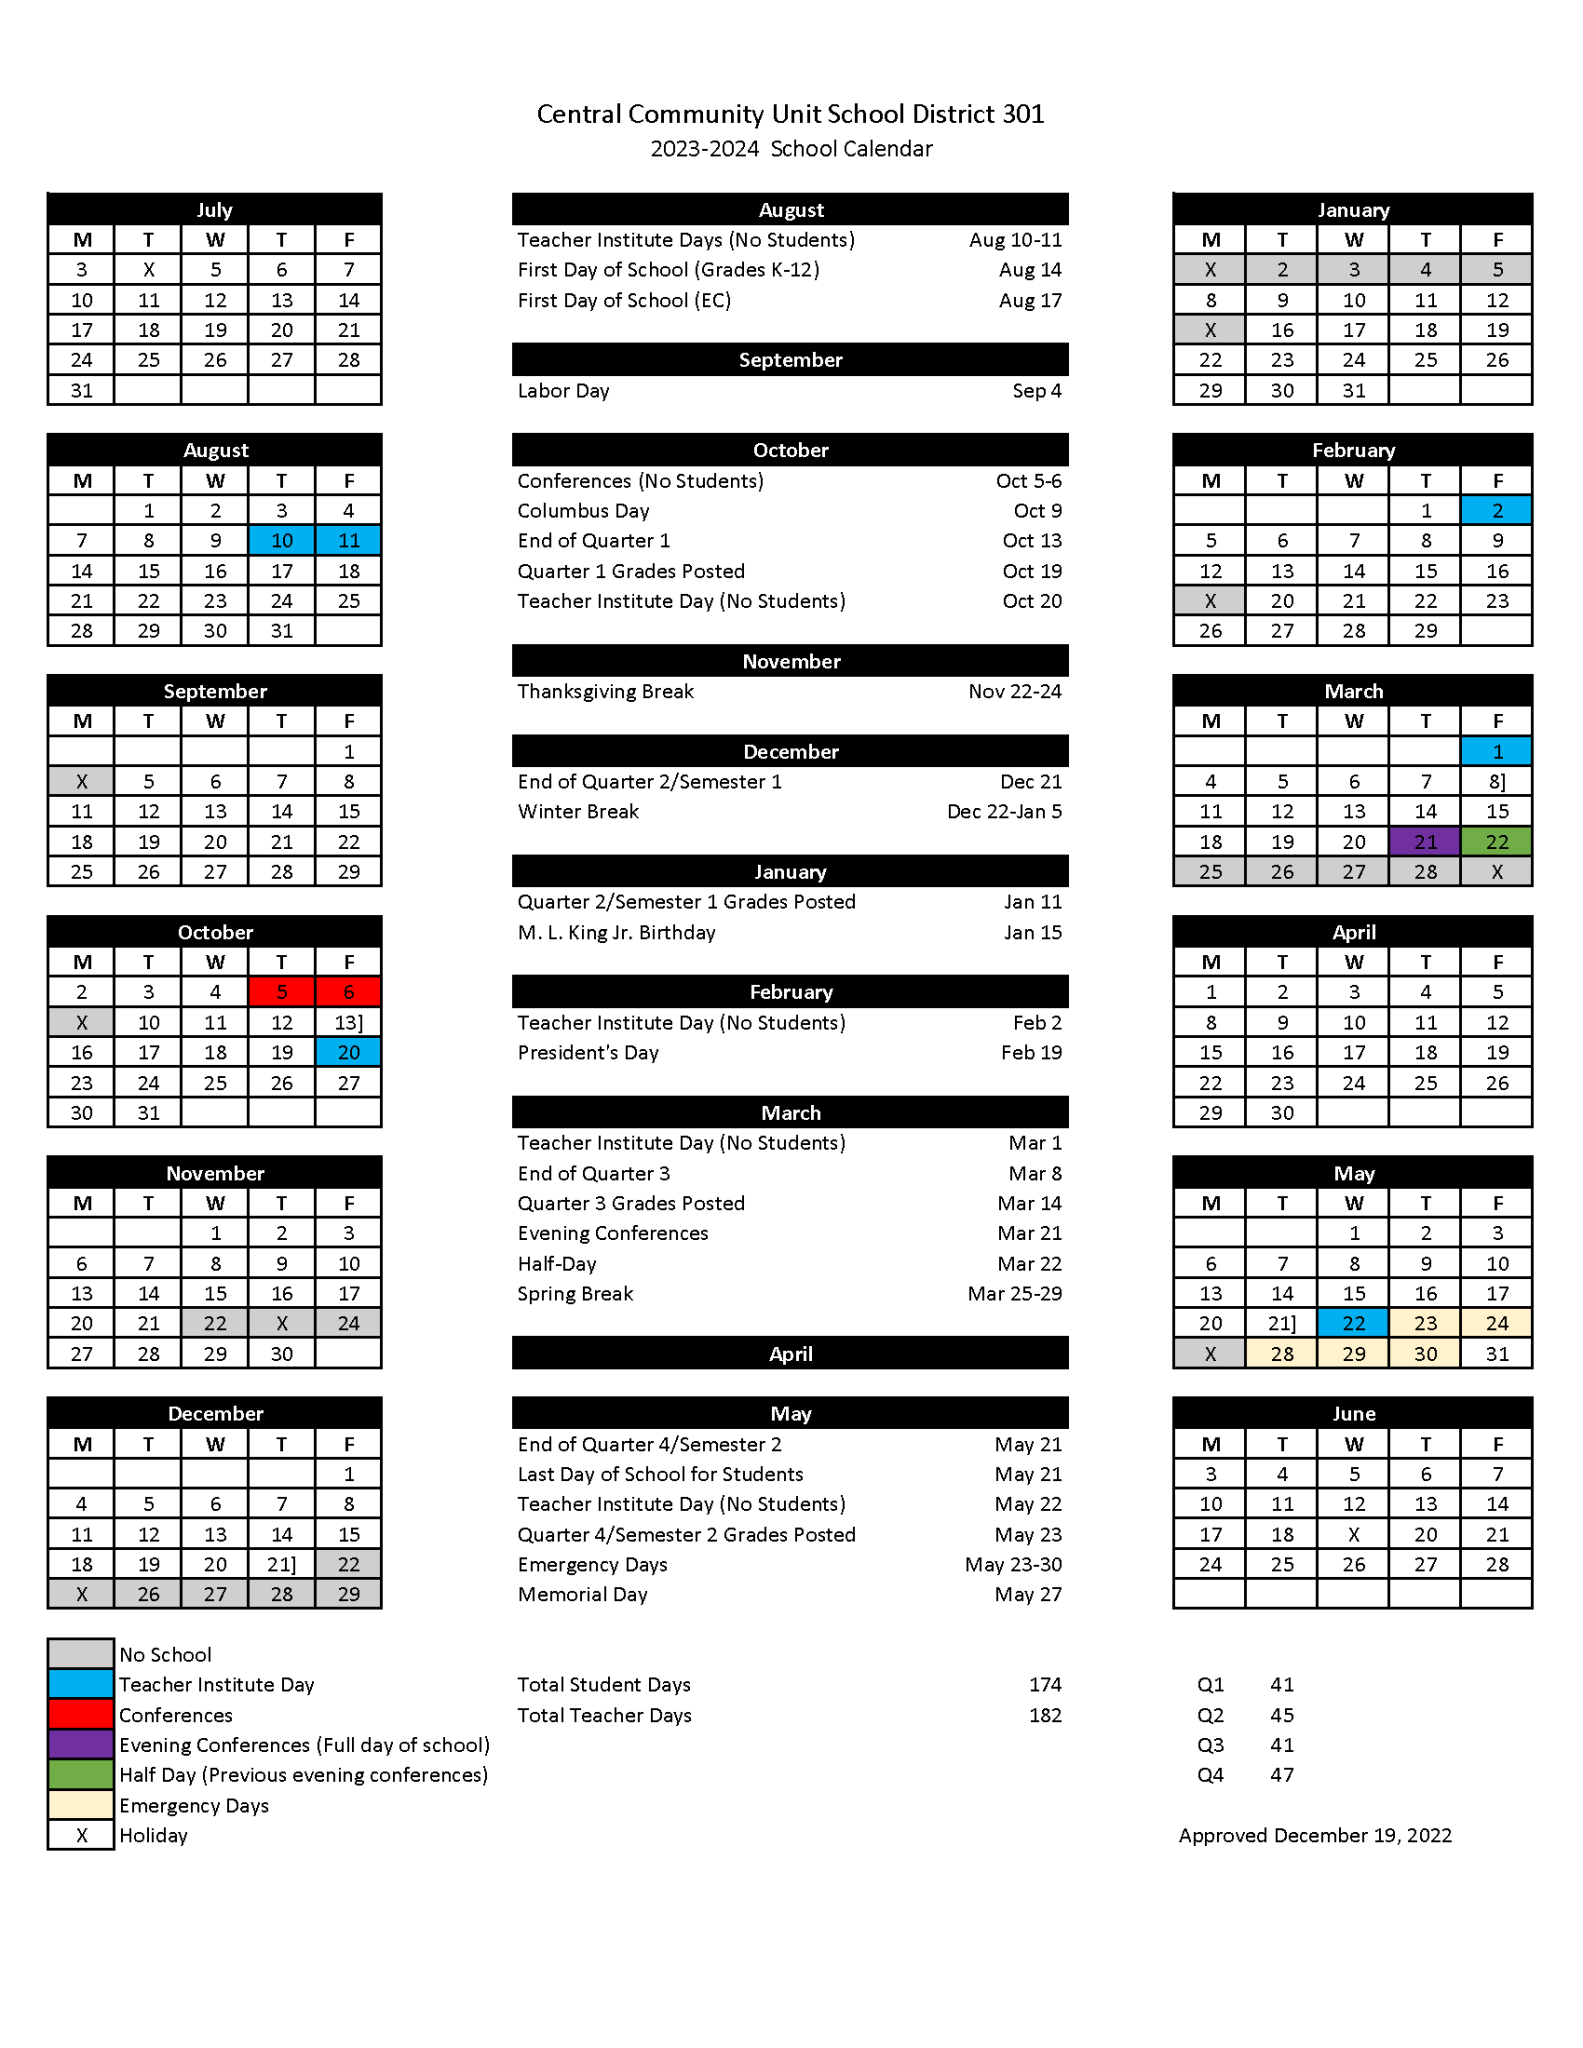 CENTRAL 301 SCHOOL CALENDAR APPROVED FOR 202324 Central School